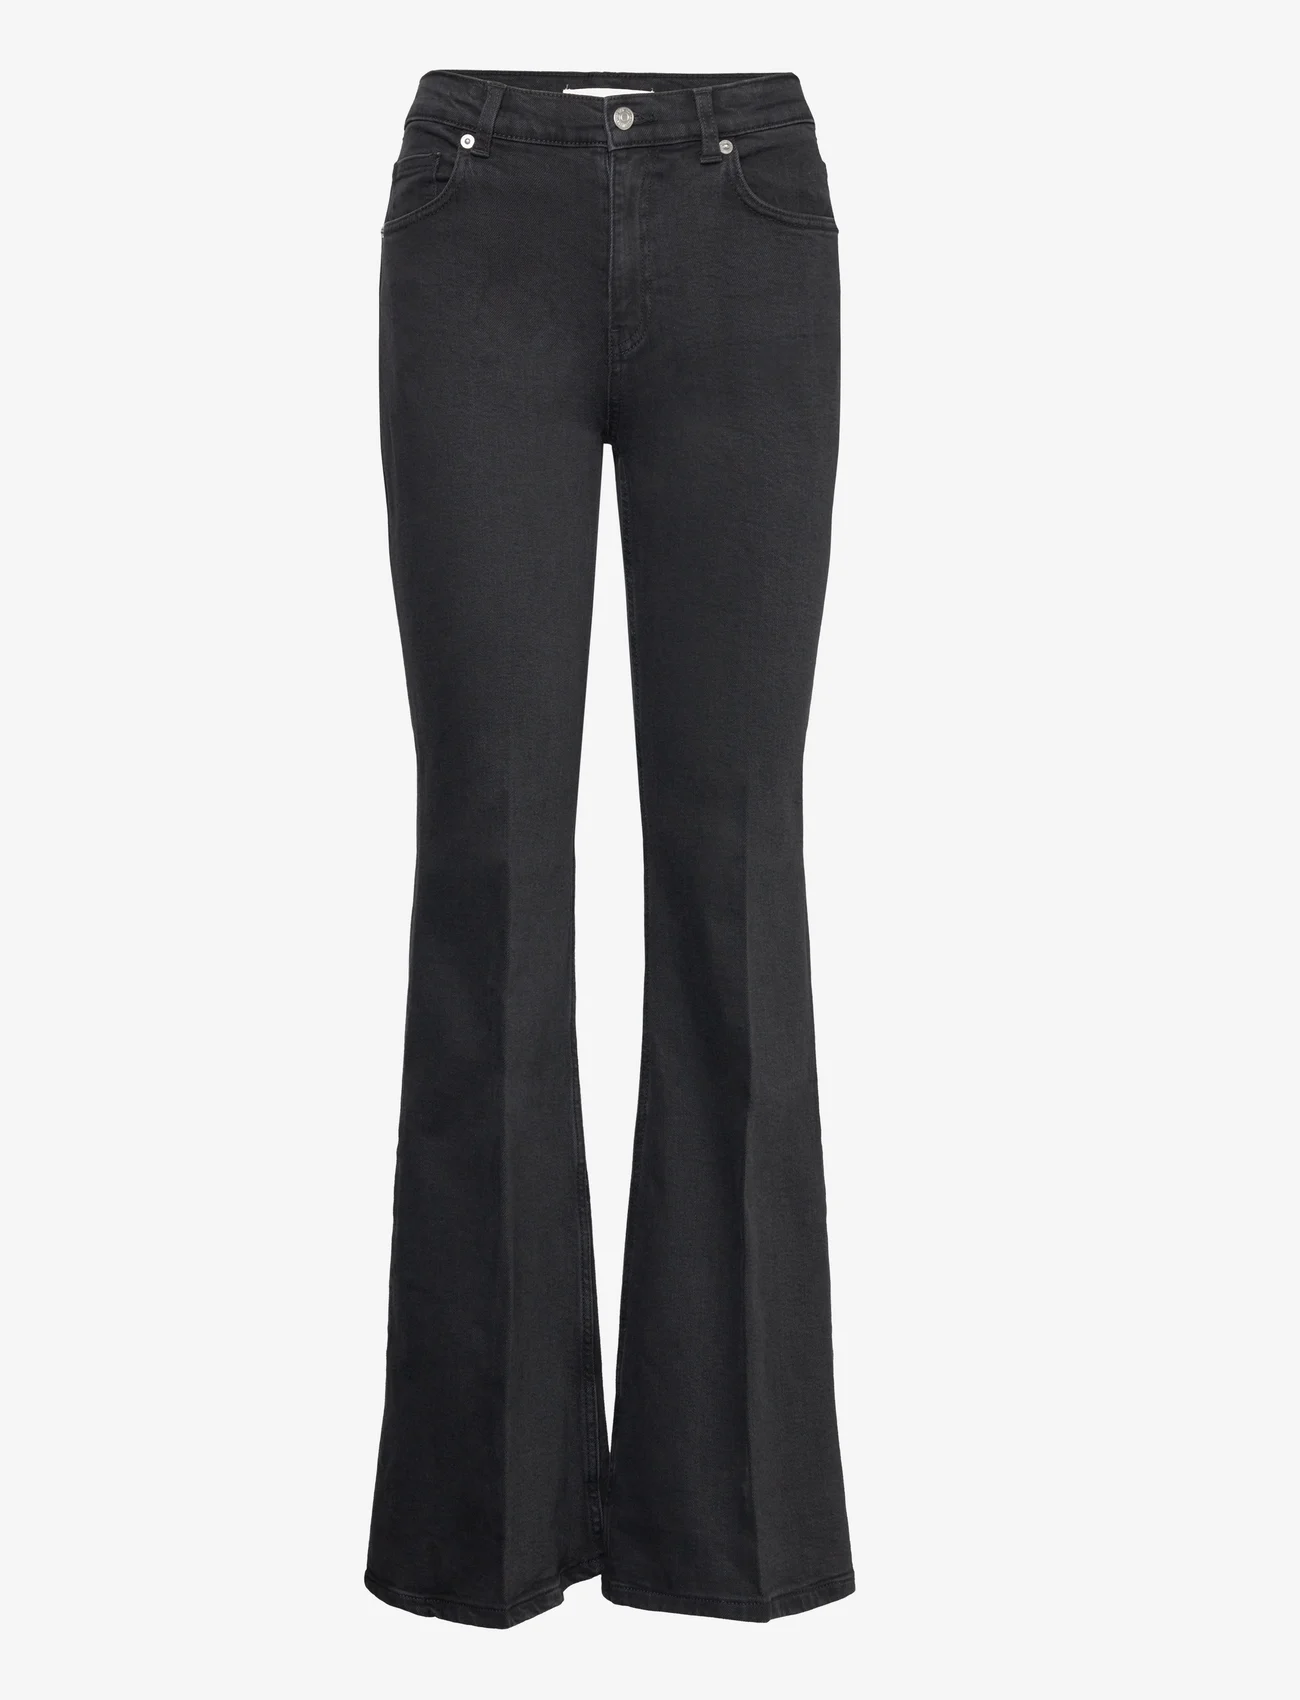 Mango - High-waist flared jeans - flared jeans - open grey - 0